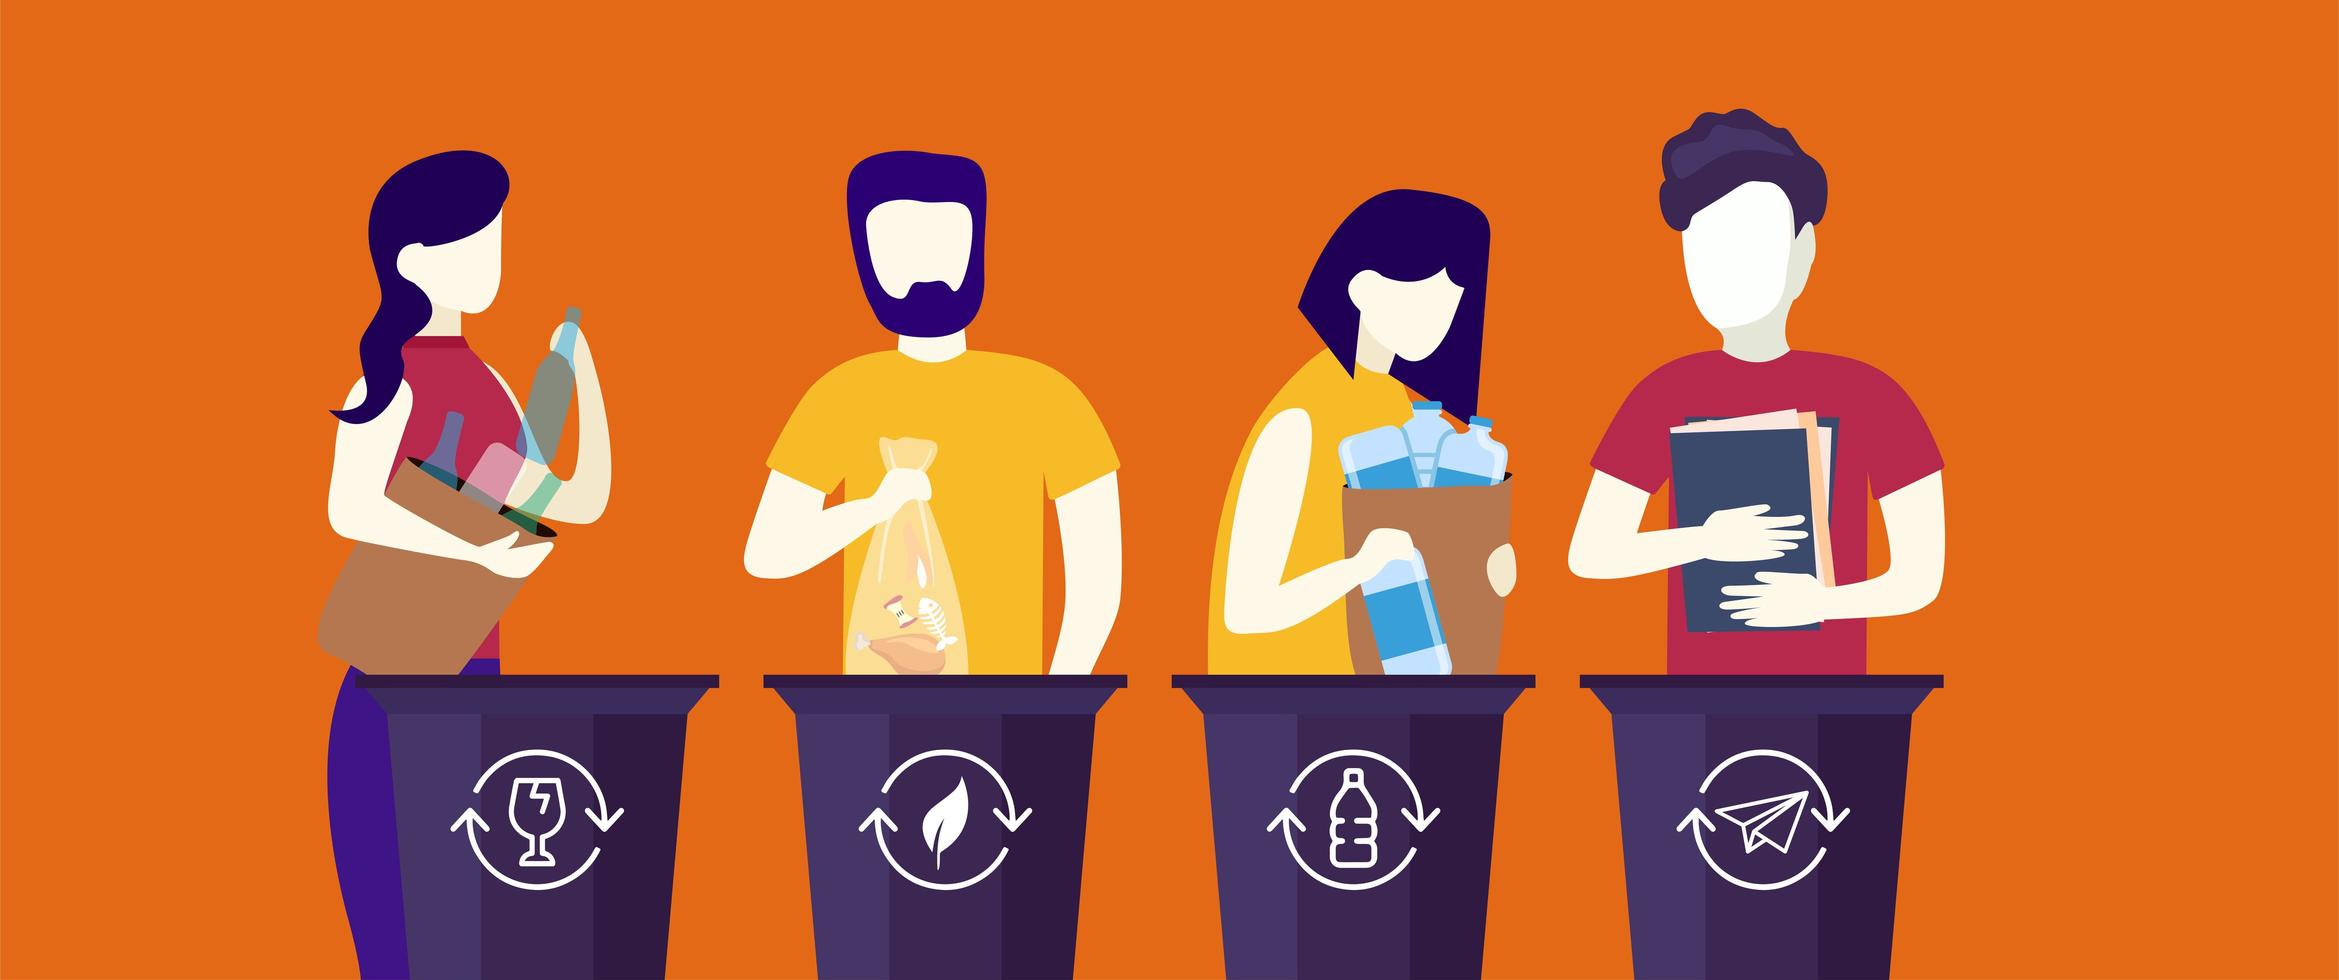 Funny flat style people putting rubbish in bins vector